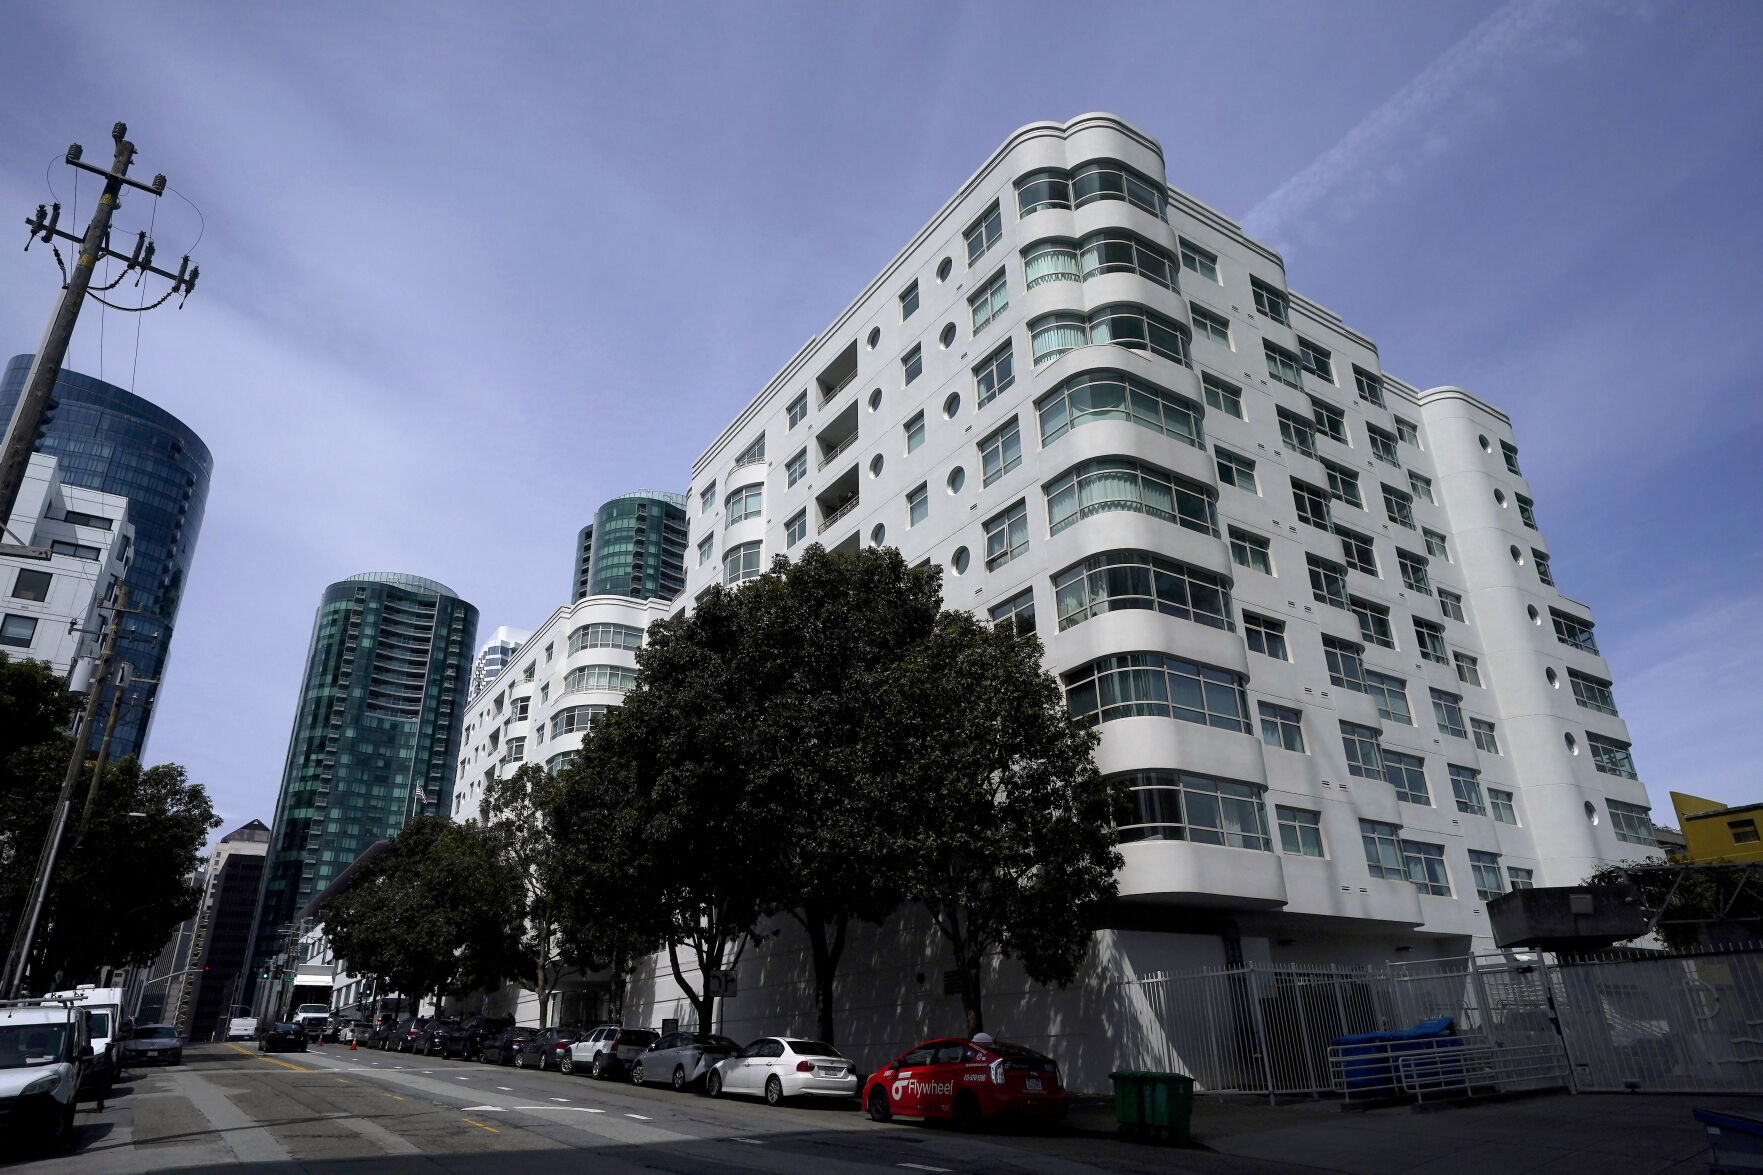 <p>The building where a technology executive was fatally stabbed outside of is shown in San Francisco, Thursday, April 6, 2023. Details of how tech executive Bob Lee came to be fatally stabbed in downtown San Francisco early Tuesday were scarce as friends and family continued to mourn the man they called brilliant, kind and unlike others in the industry. (AP Photo/Jeff Chiu)</p>   PHOTO CREDIT: Jeff Chiu - staff, AP